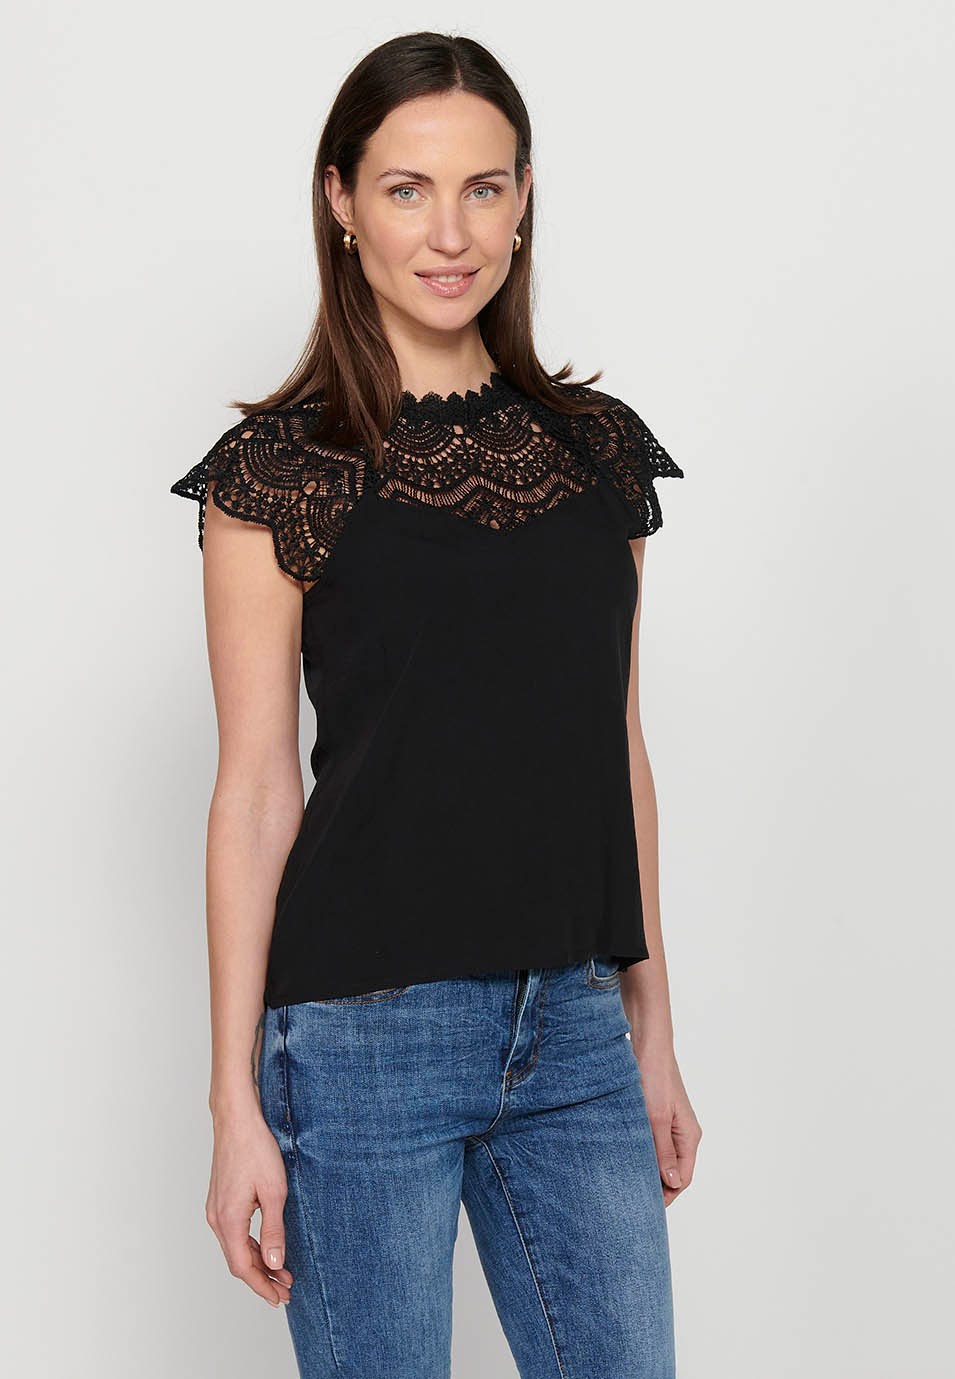 Sleeveless T-shirt, round neckline with lace, Black color for women